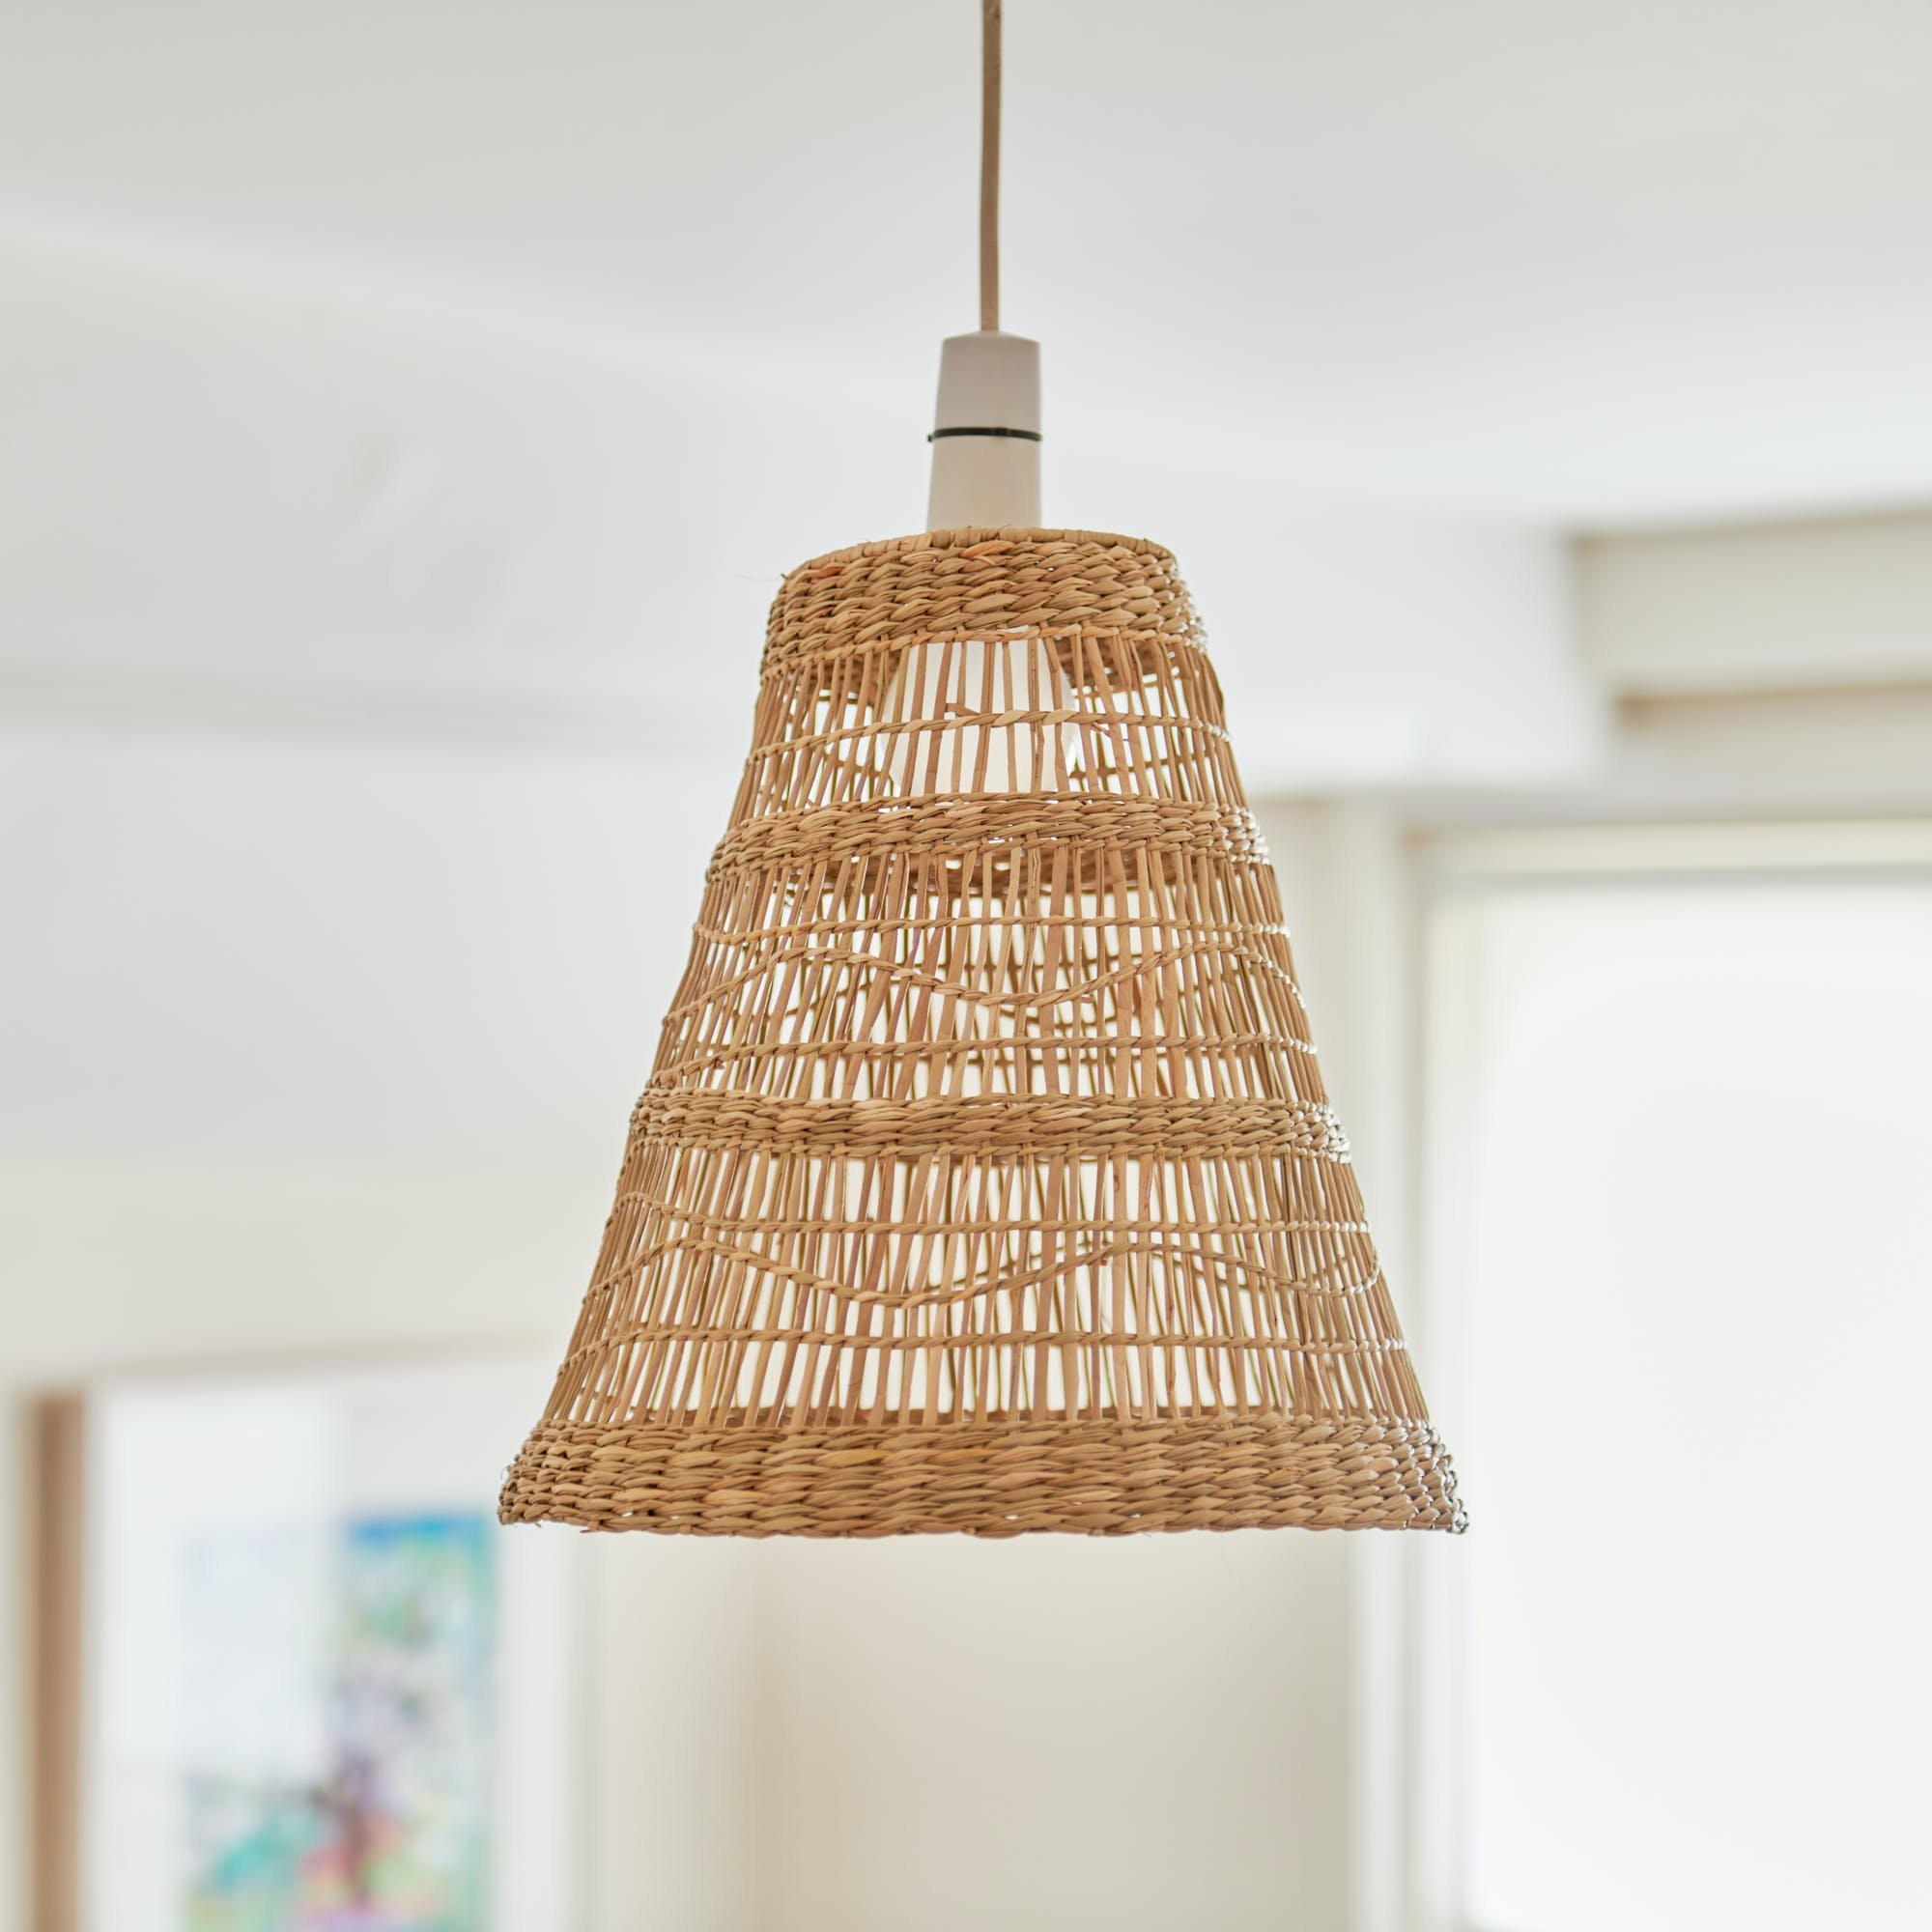 Our seagrass lamp shade is the perfect way to introduce a little nature into your home. Handwoven with natural seagrass fiber.